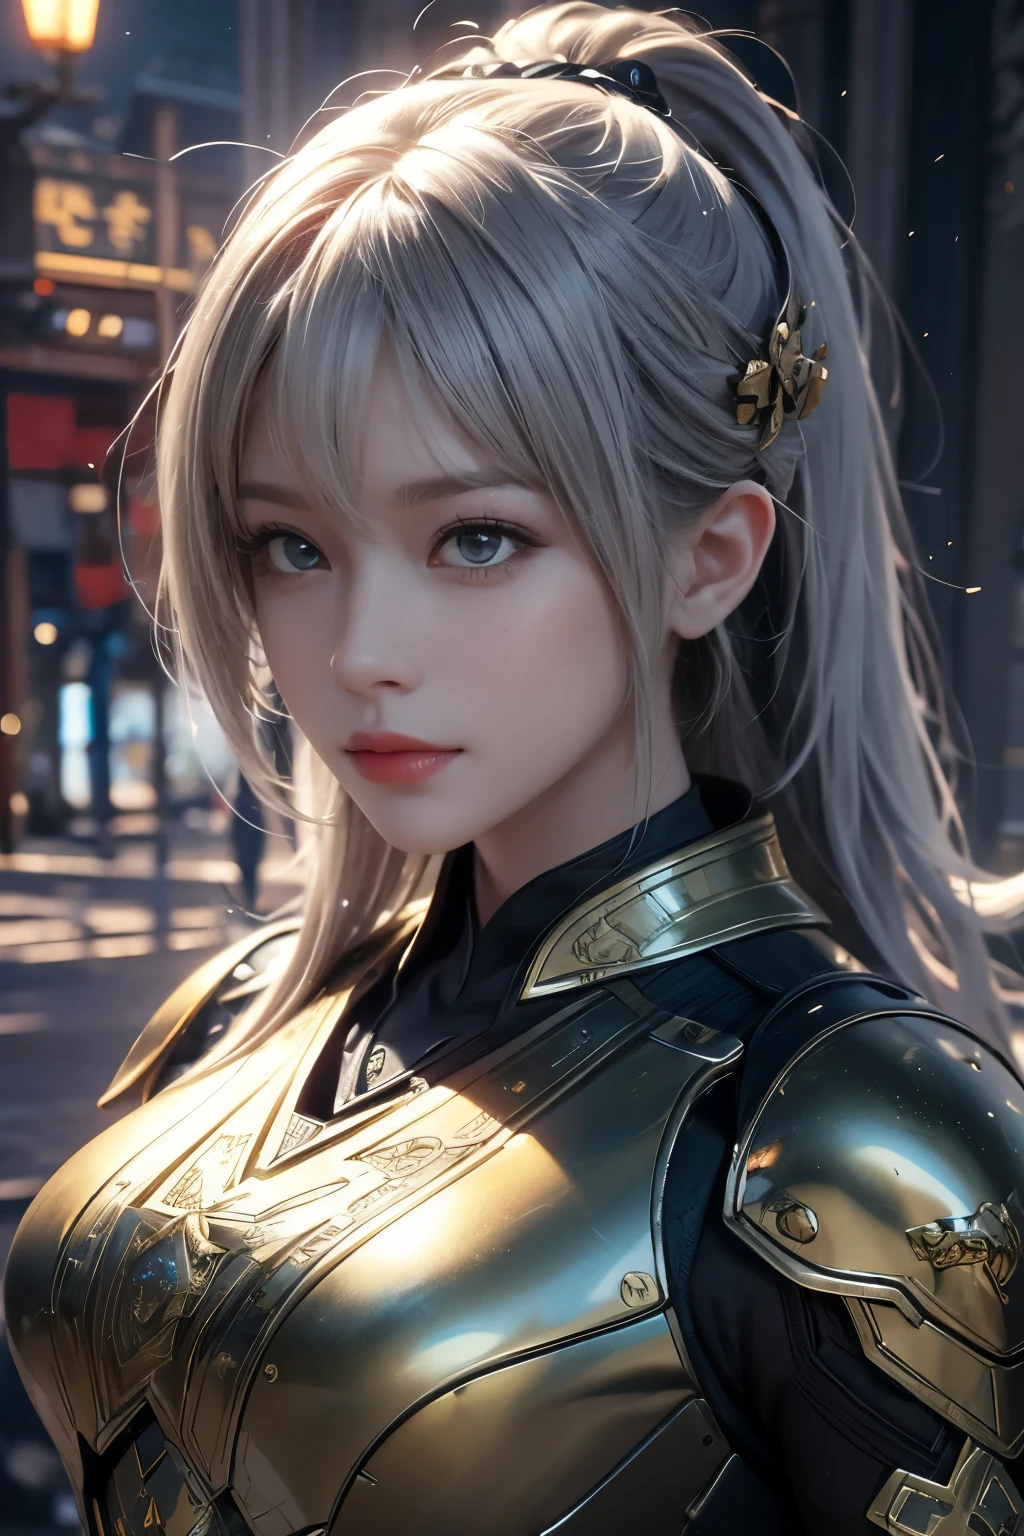 Game art，The best picture quality，Highest resolution，8K，(A bust photograph)，(Portrait:1.5)，(Head close-up)，(Rule of thirds)，Unreal Engine 5 rendering works， (The Girl of the Future)，(Female Warrior)， 
20-year-old girl，An eye rich in detail，(Big breasts)，Elegant and noble，indifferent，brave，
(Future style combat suit combining the characteristics of ancient armor，Ancient runes of light，Combat accessories with rich detailetallic luster)，Future police officer，Cyberpunk Characters，

Photo poses，Simple background，Movie lights，Ray tracing，Game CG，((3D Unreal Engine))，oc rendering reflection pattern